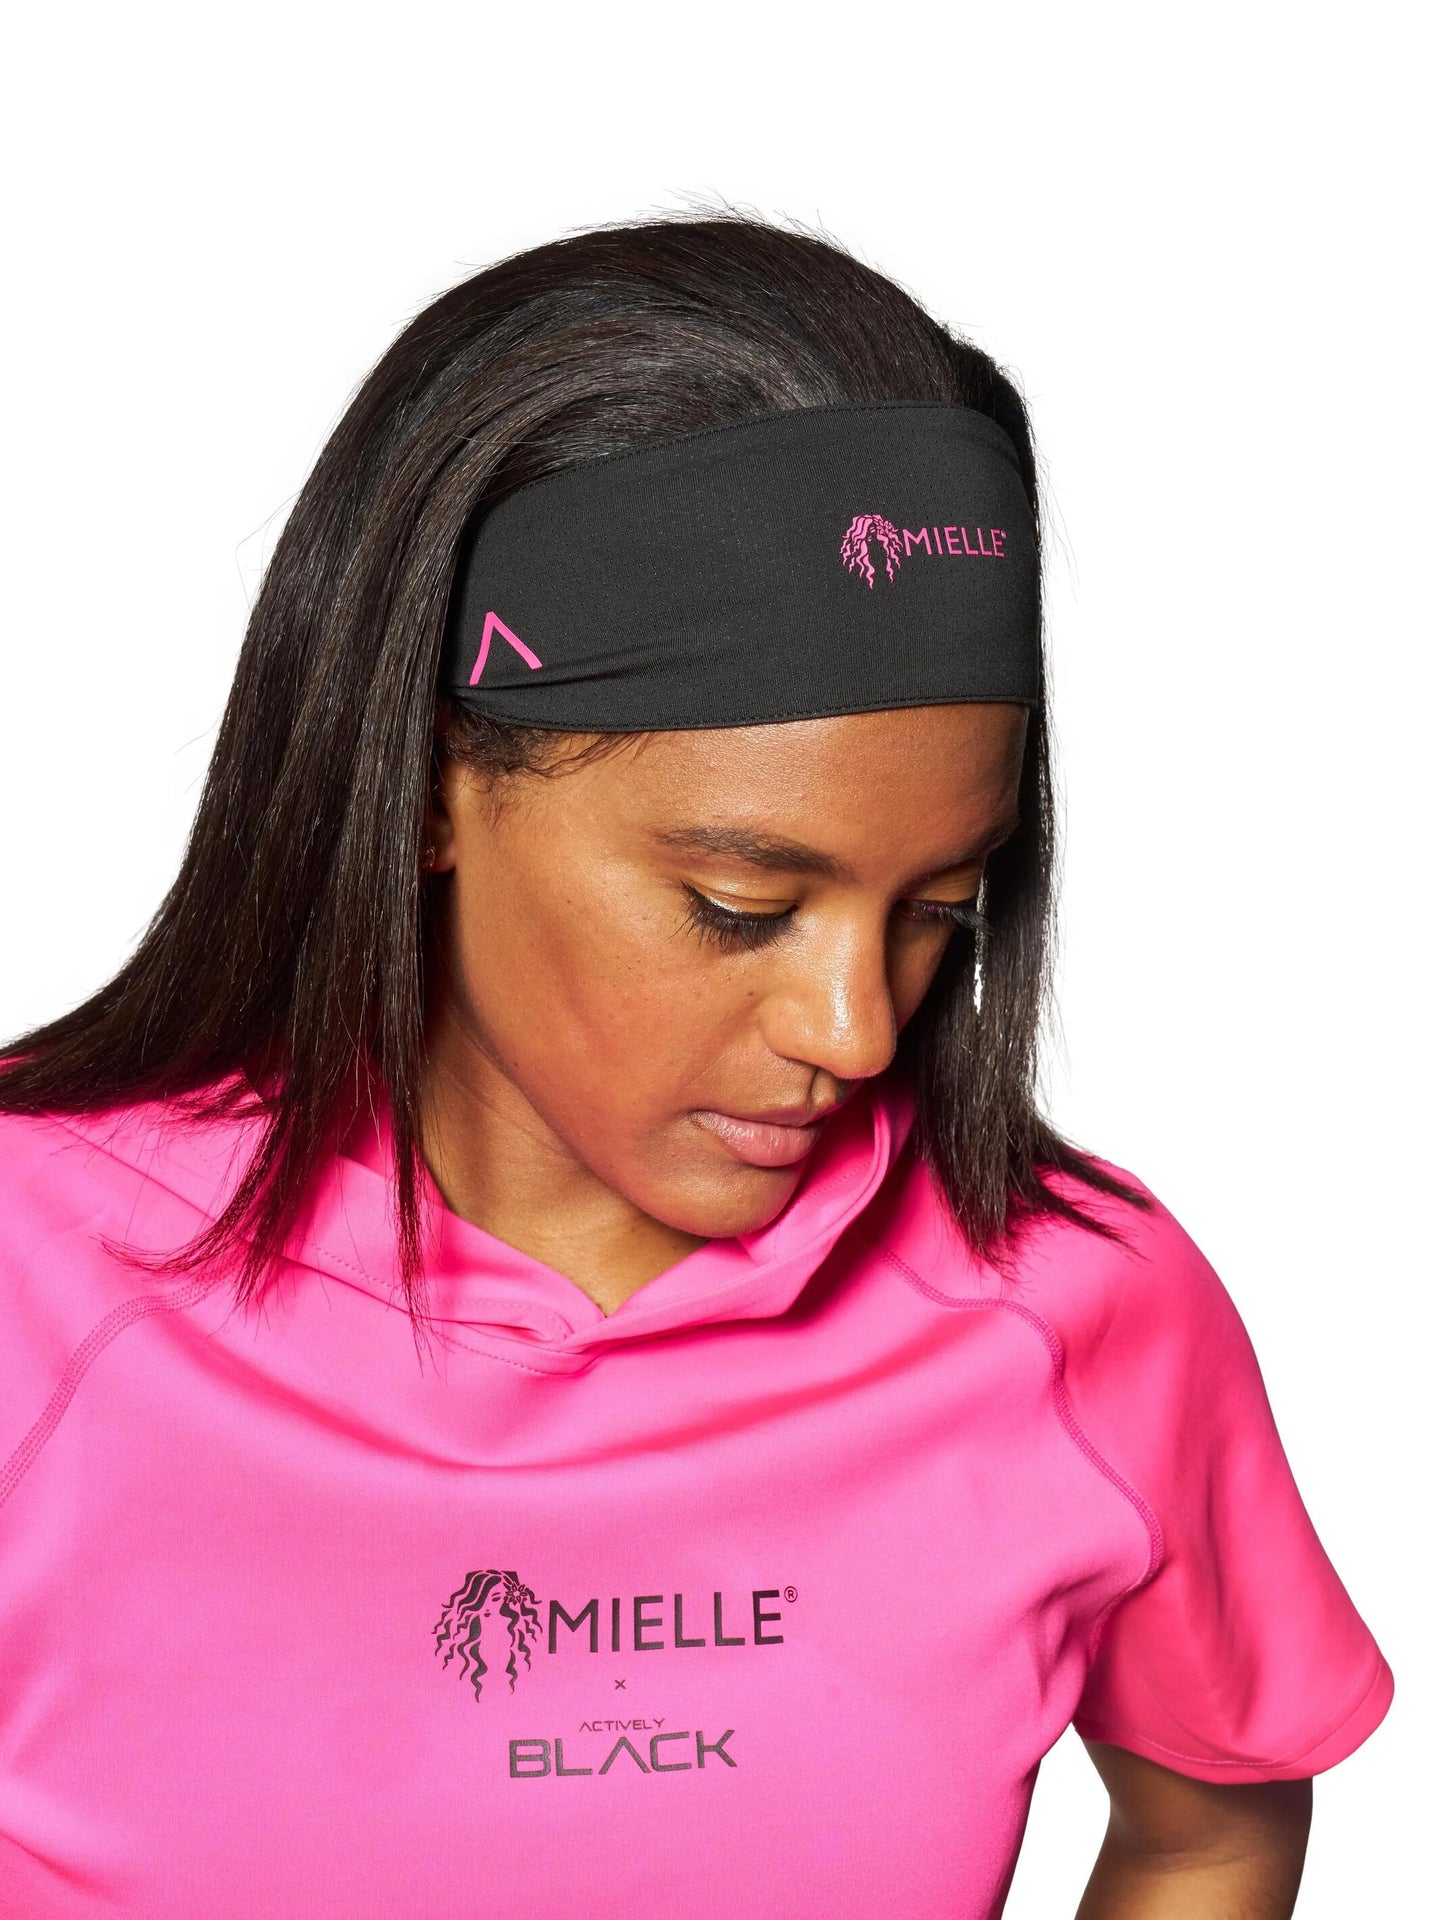 Actively Black x Mielle Pink Sweatband